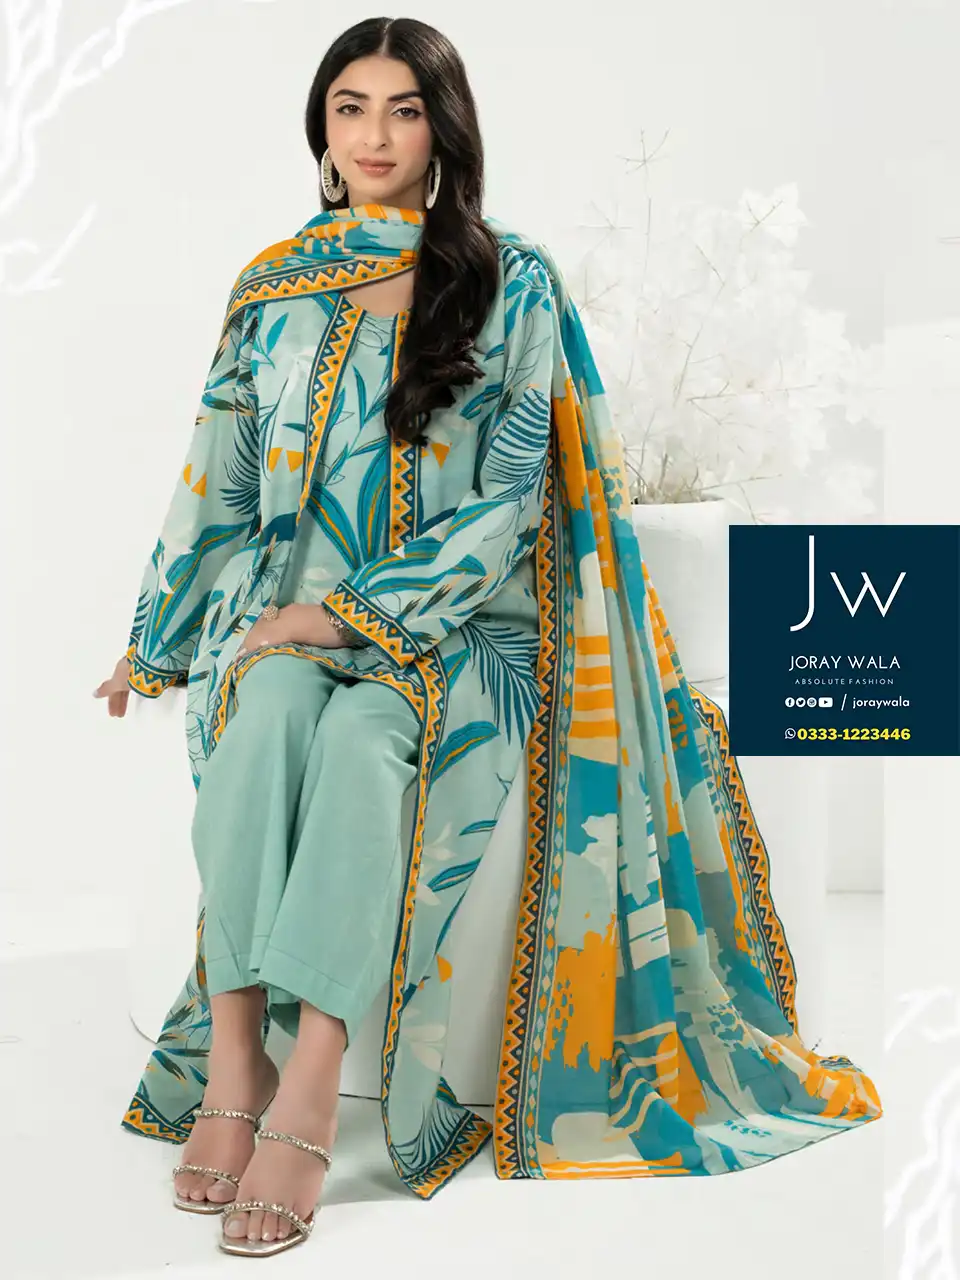 ZESH Printed Pop Series D4 available at joraywala with free delivery